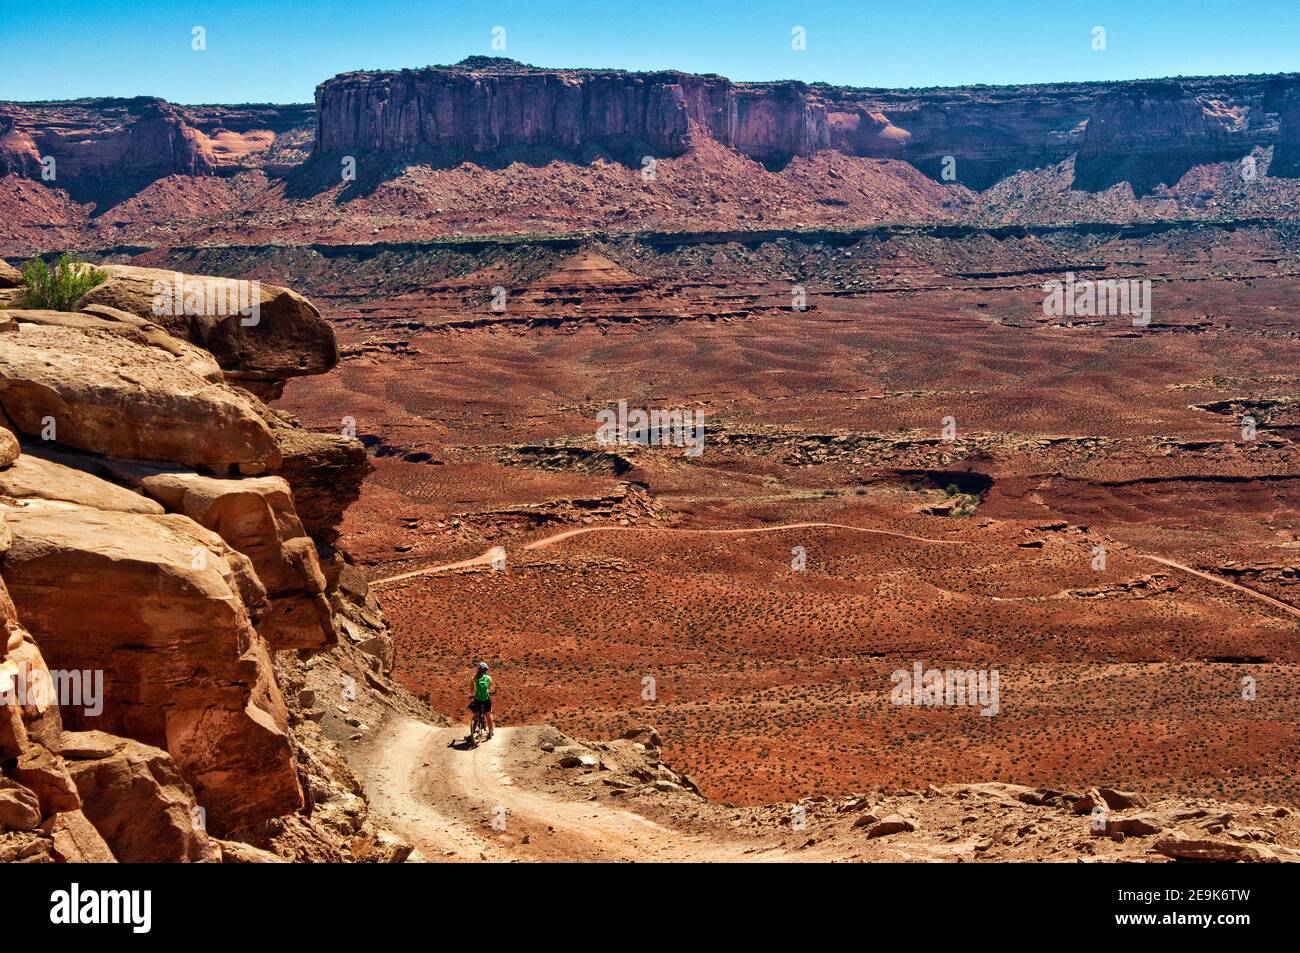 Woman mountain biker on White Rim Road, at Murphy Hogback, Murphy Point cliffs in distance, Canyonlands National Park, Utah, USA Stock Photo